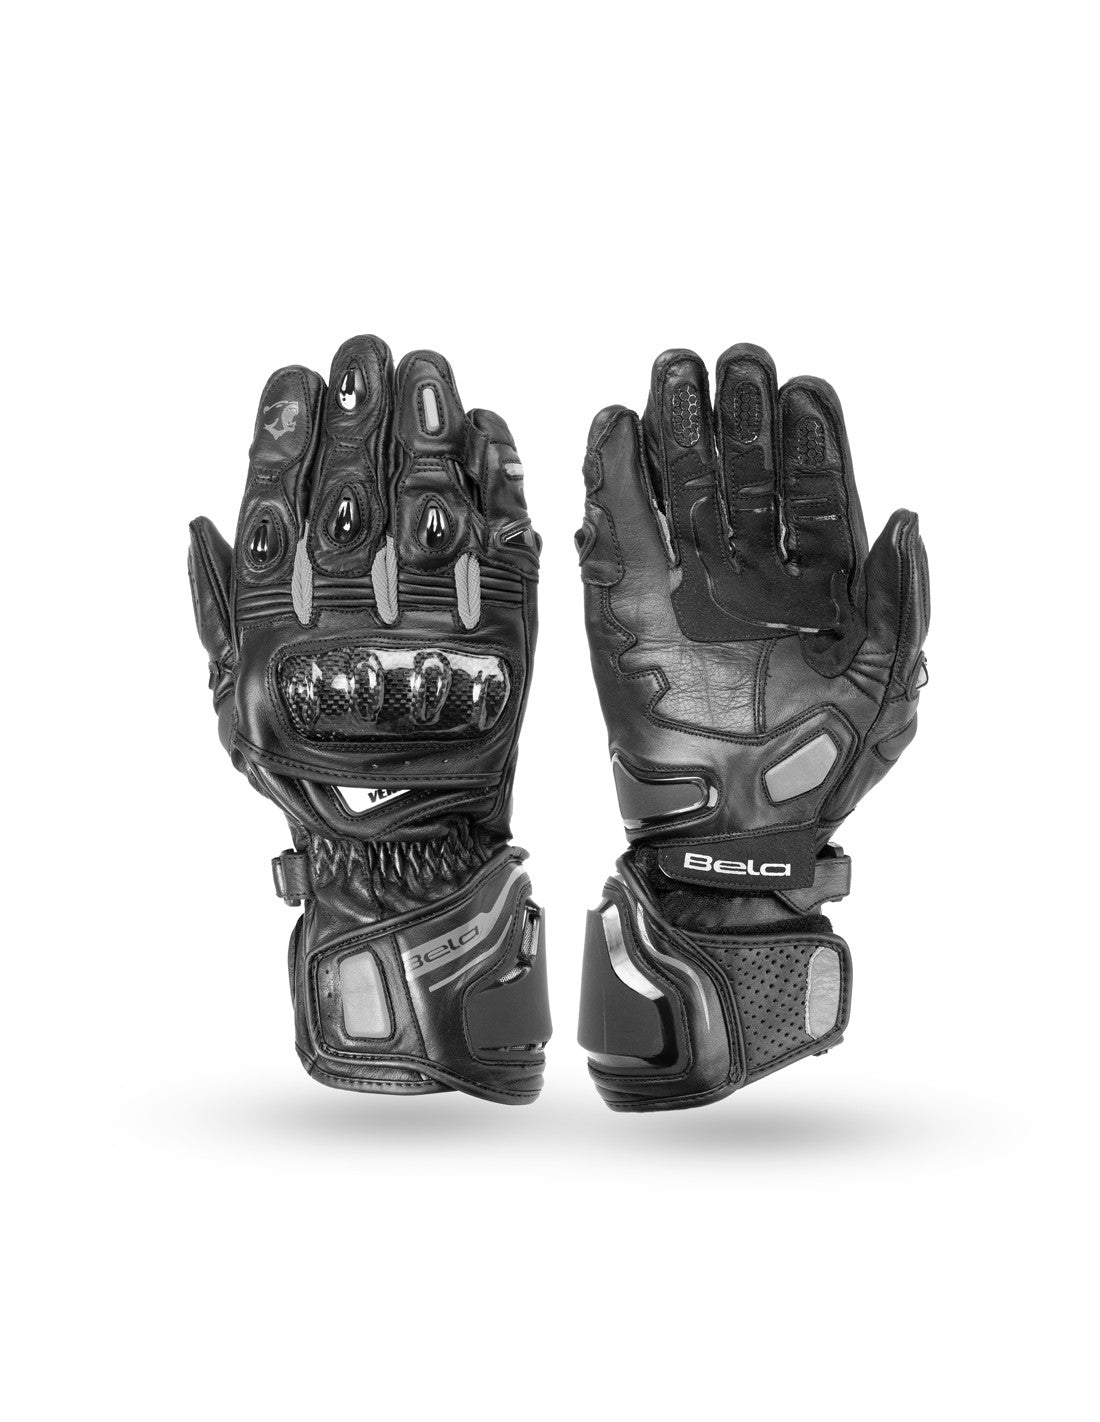 bela venom rs racing lady black and gray gloves front and back side view